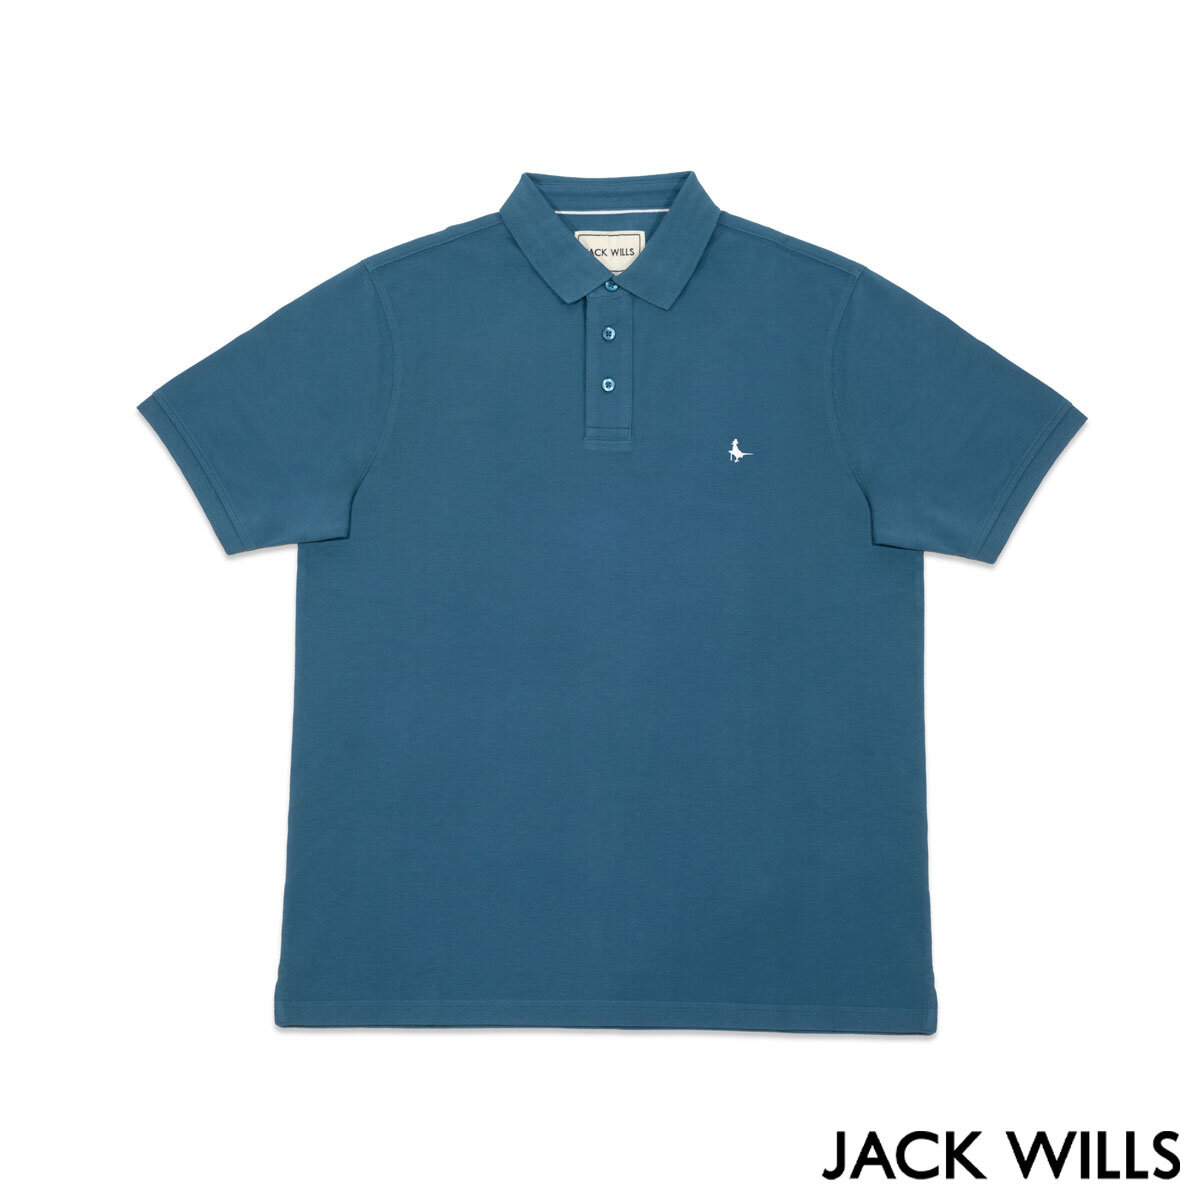 Jack Wills Men's Polo Shirt in Blue